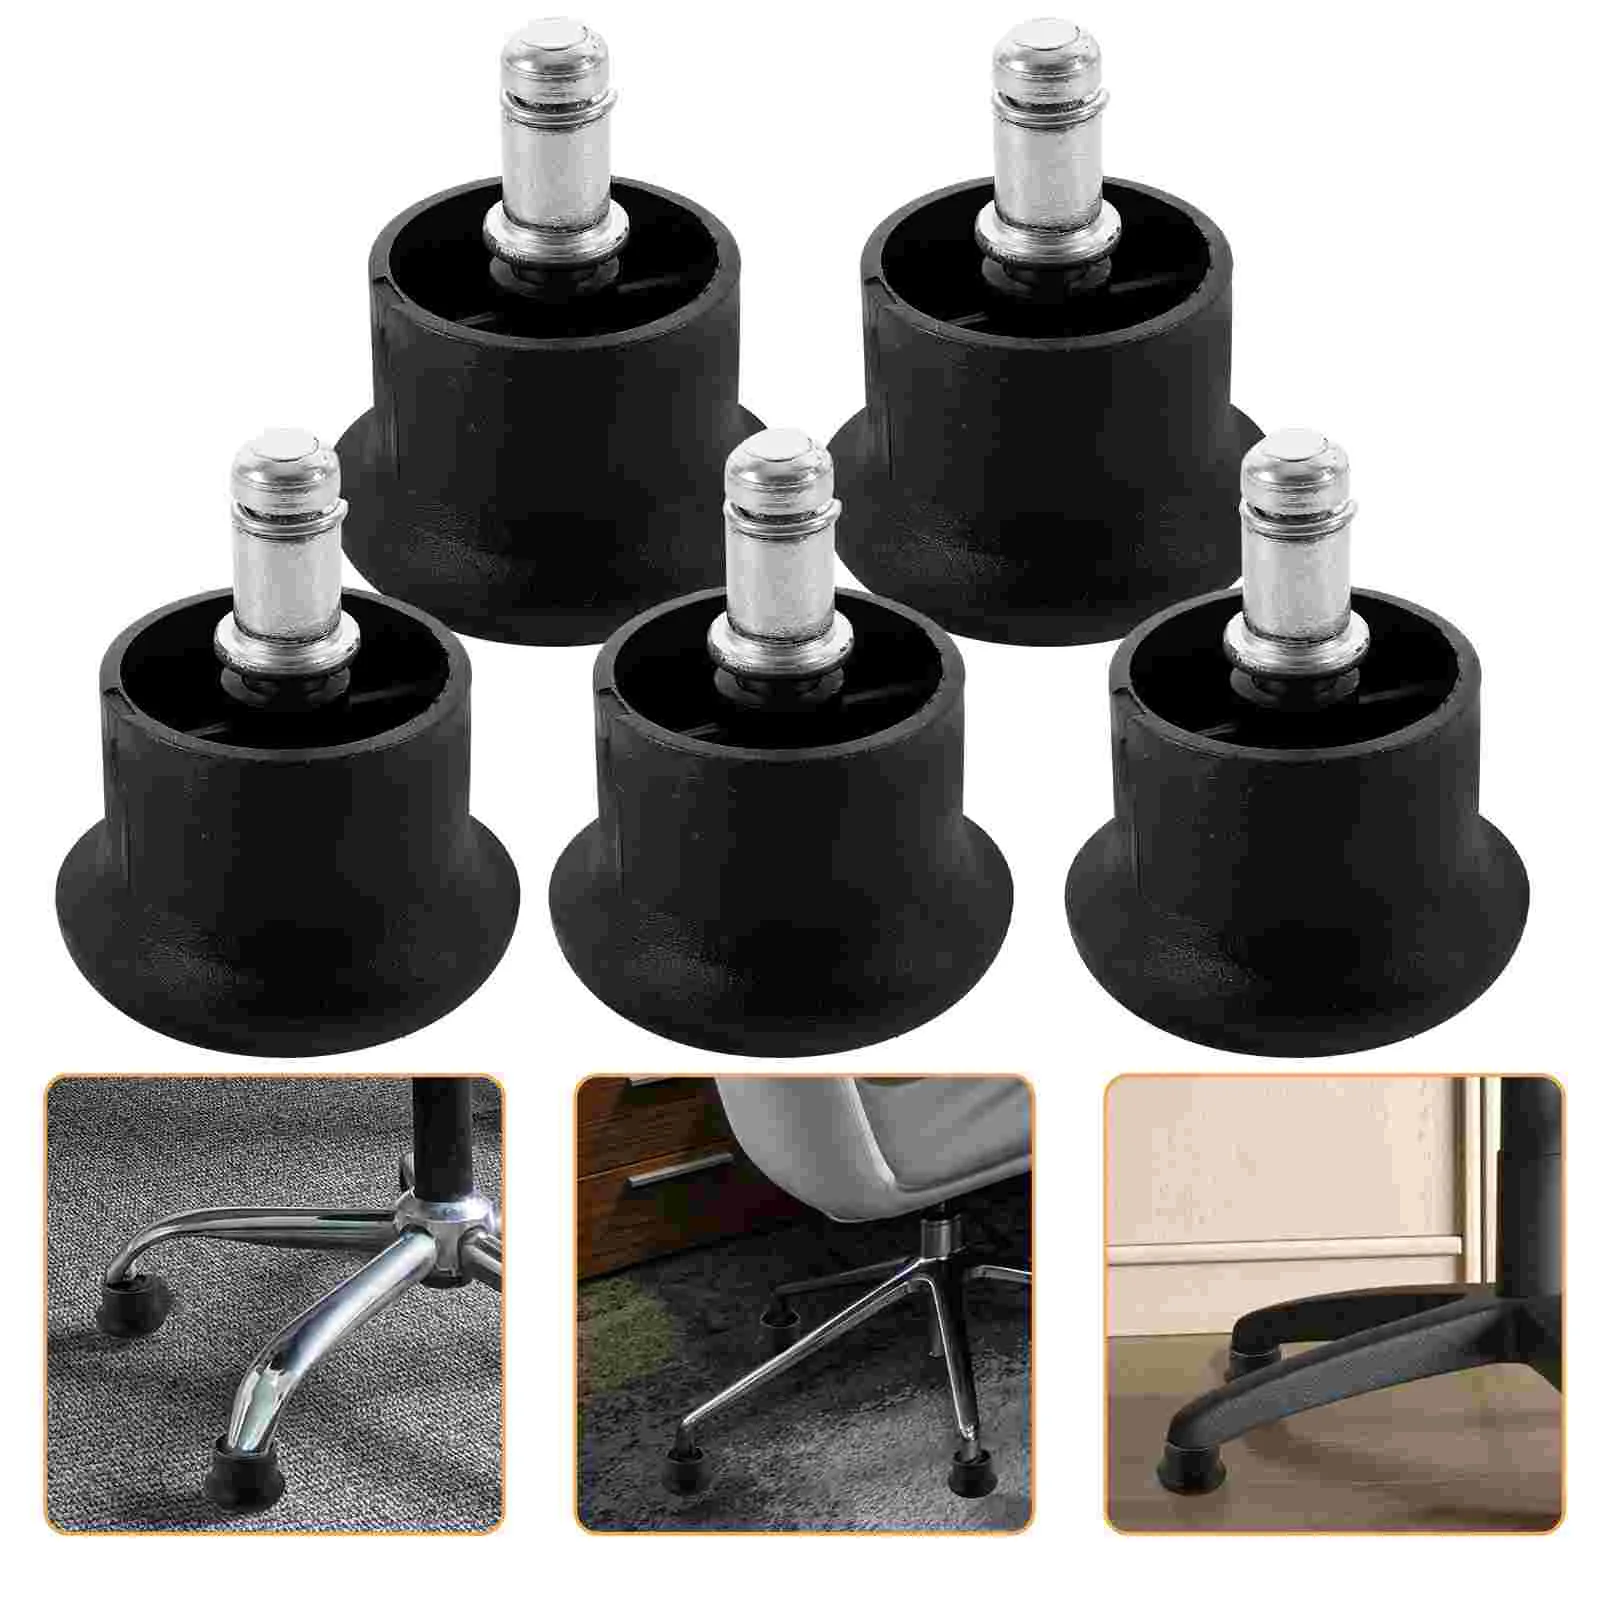 

Chairs Glide Castors Glides Replacement Furniture Floor Gliders Chair Wheels Stopper for Office Home Furniture Wheel